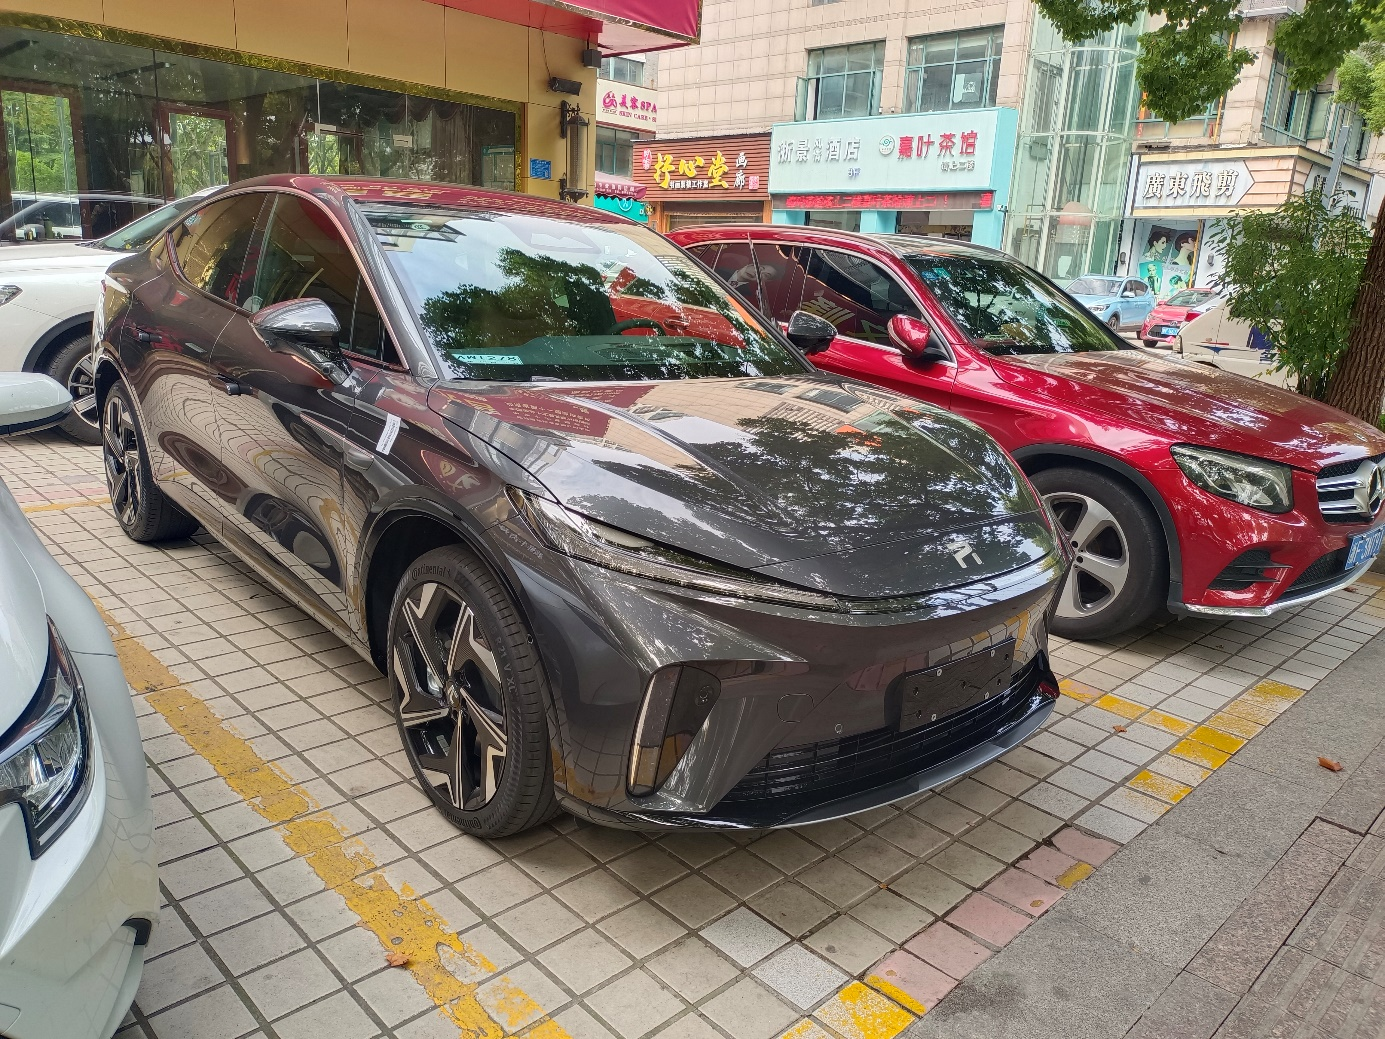 Zhejiang Fei Fan suggests car owners to have a chat - My first experience with the high-level version R7.